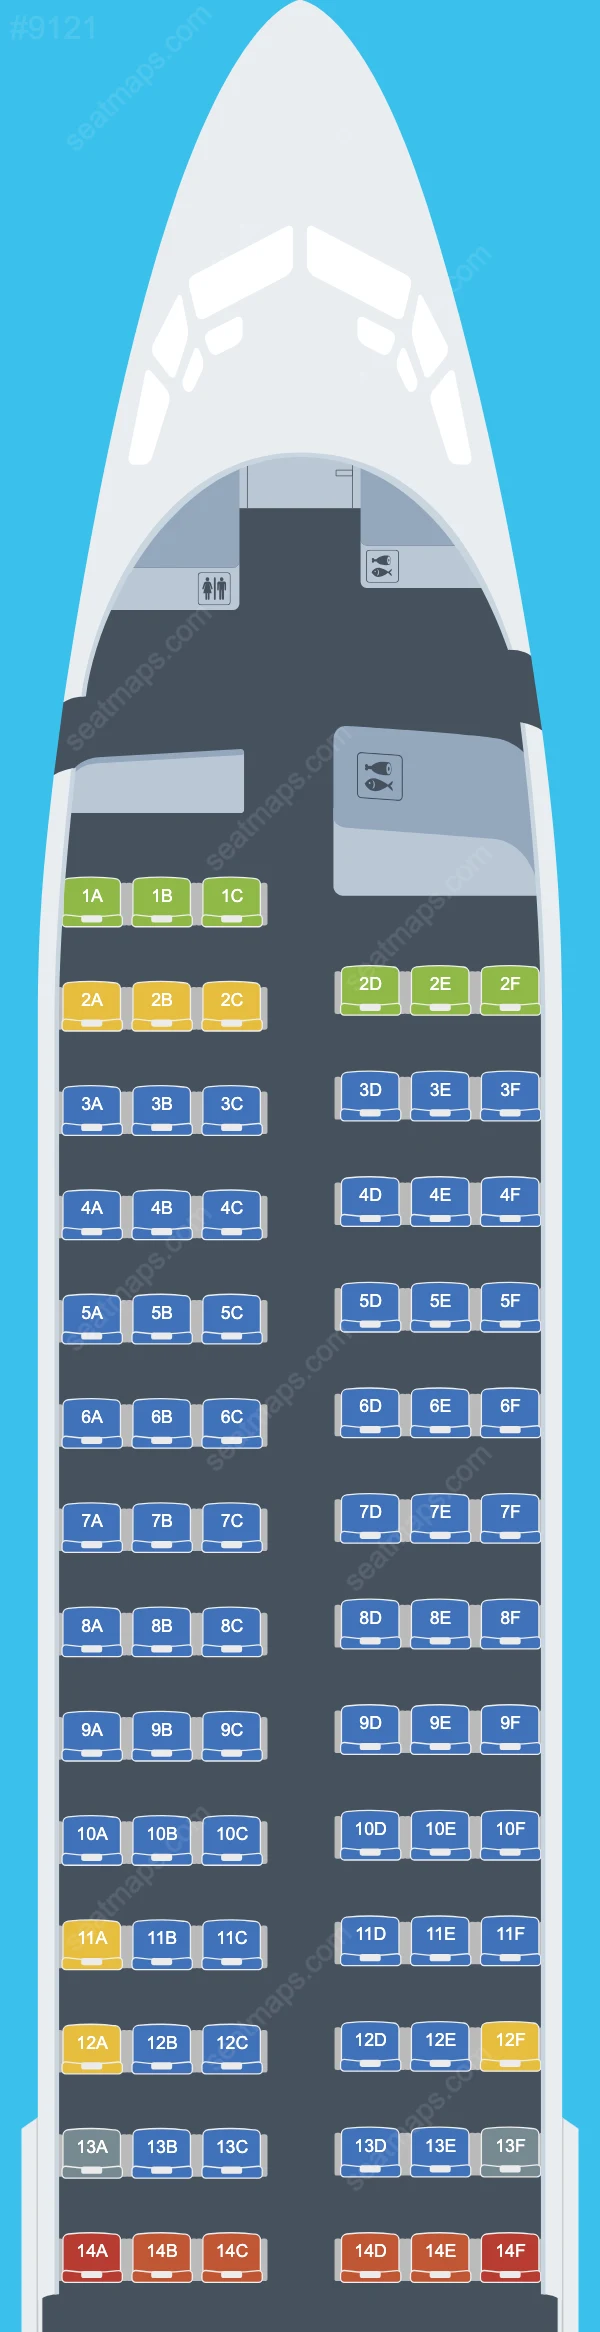 Flair Airlines Boeing 737 Seat Maps 737-800